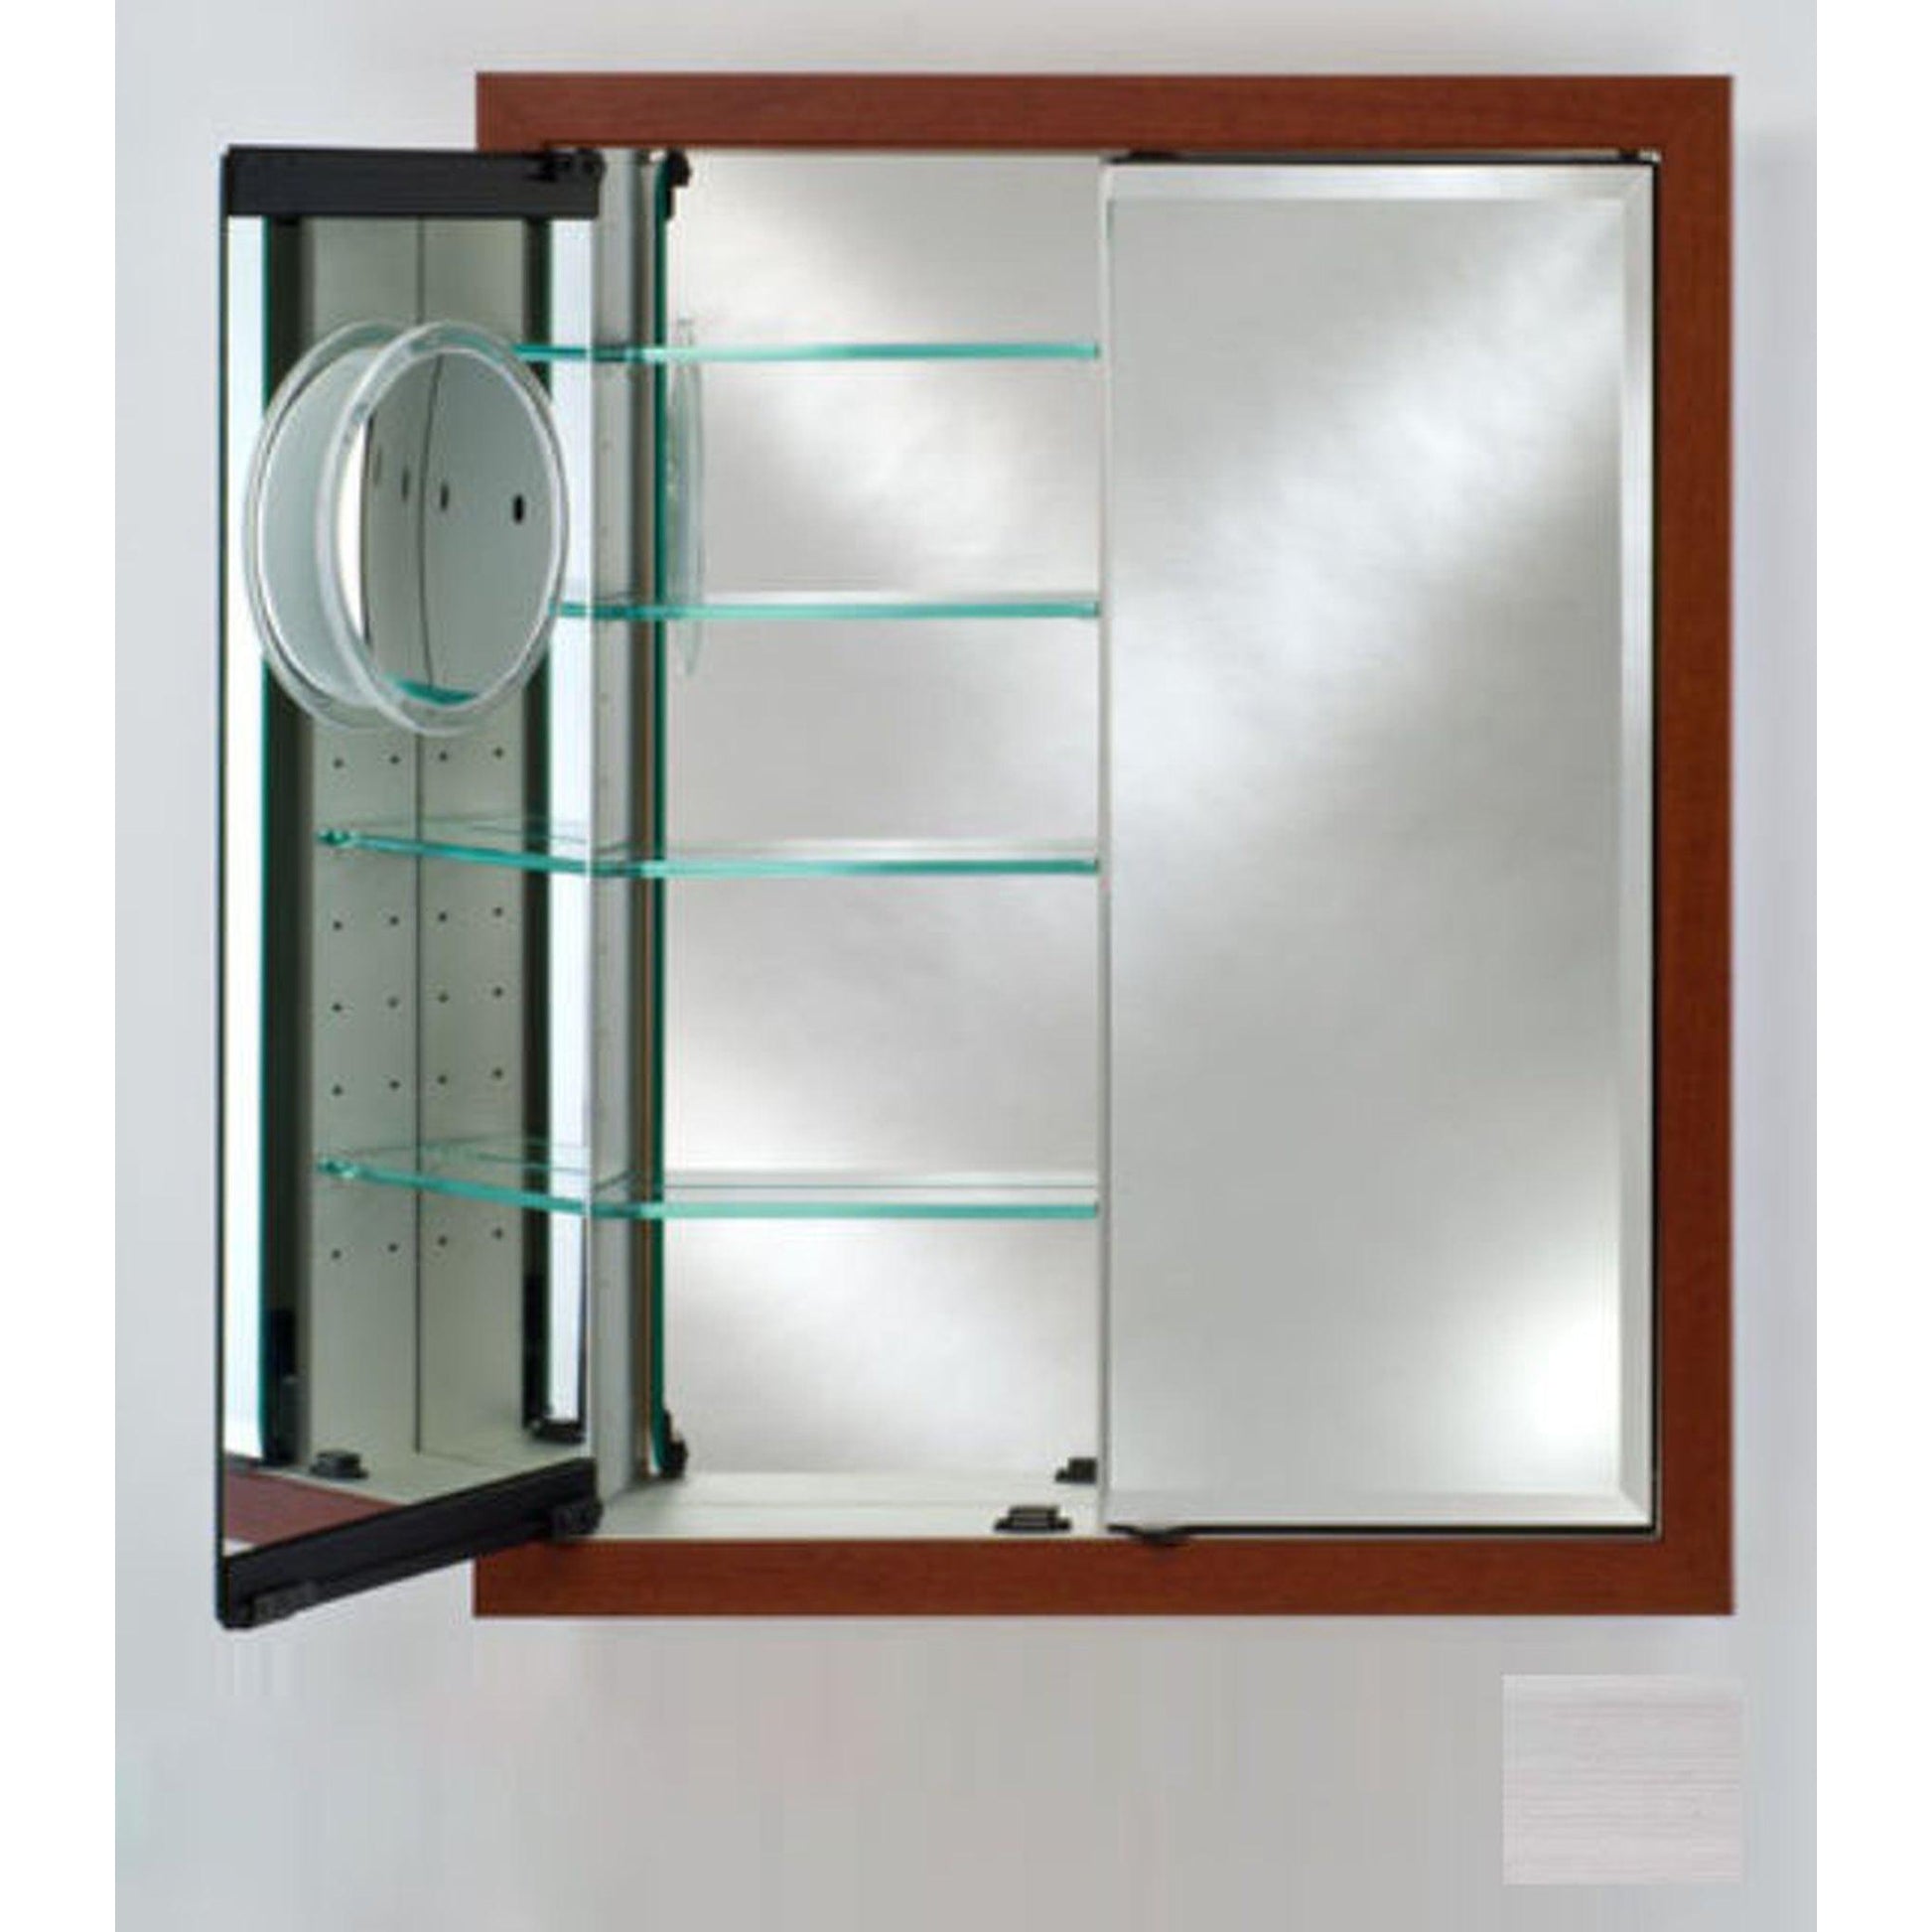 Afina Signature 31" x 36" Soho Stainless Recessed Double Door Medicine Cabinet With Beveled Edge Mirror